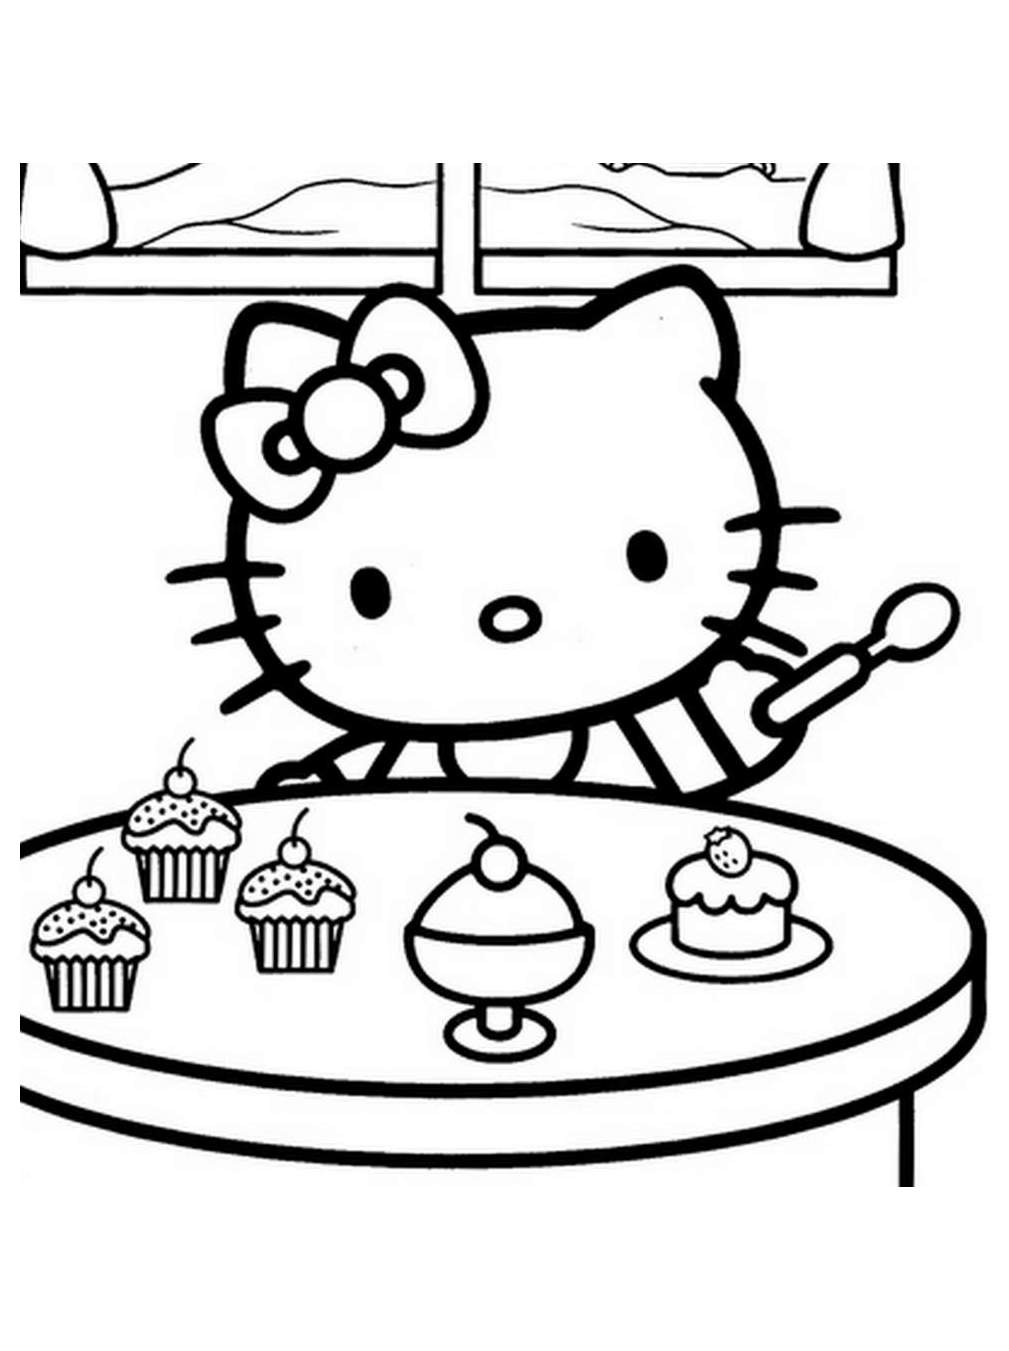 hello-kitty-coloring-pages-for-kids-hello-kitty-kids-coloring-pages